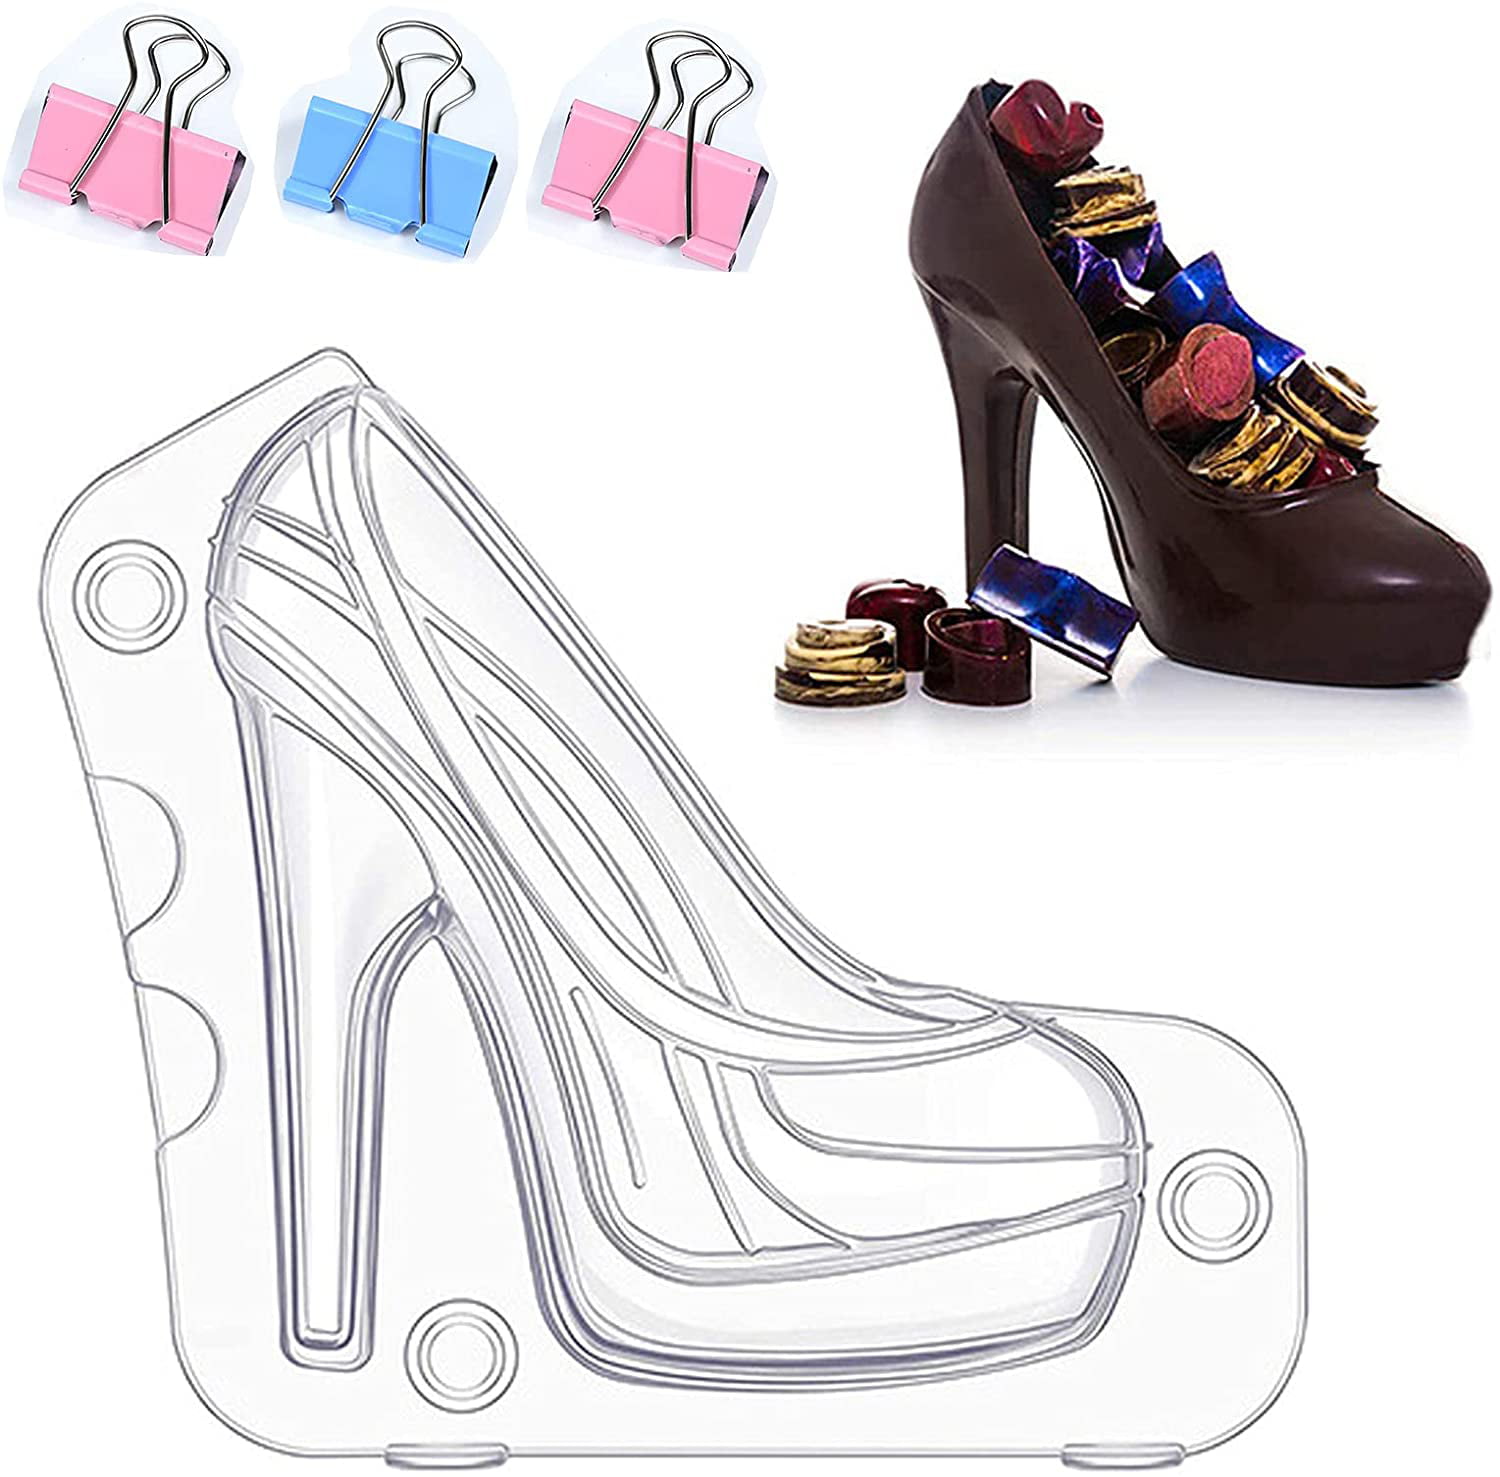 3D High Heel Shoe Type Chocolate Mold Candy Cookies Tool DIY Cake Maker Mould 